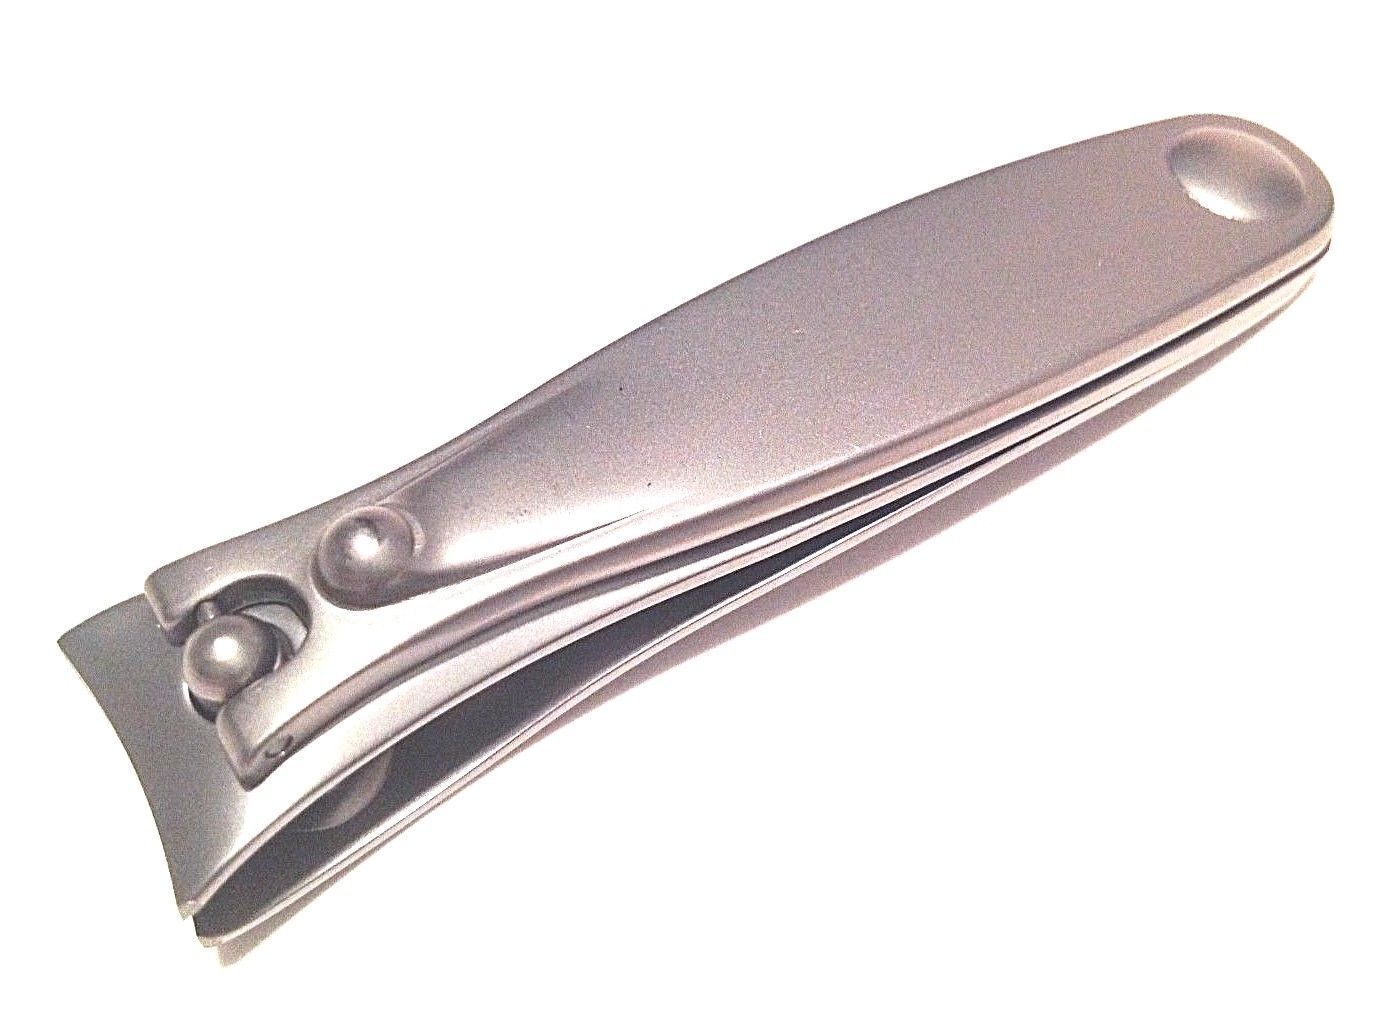 Manicure And Pedicure Tools - 1. Nail Cutter